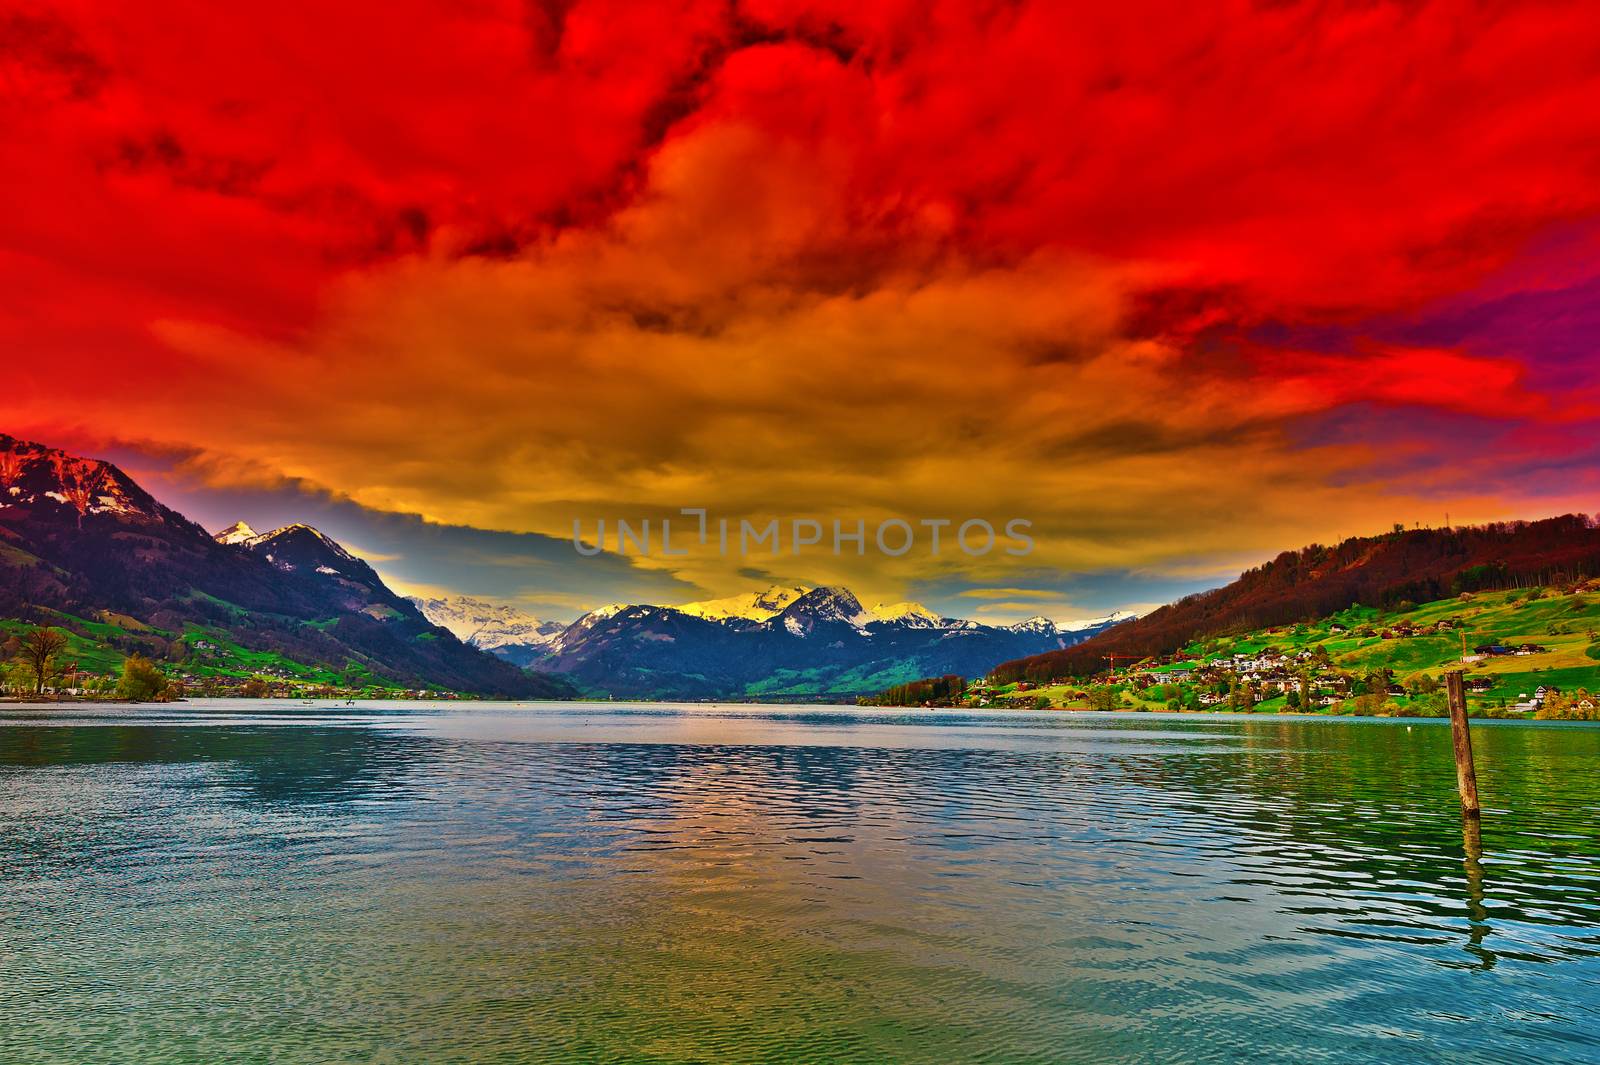 Lake Sarner on the Background of Snow-capped Alps in Switzerland at Sunset